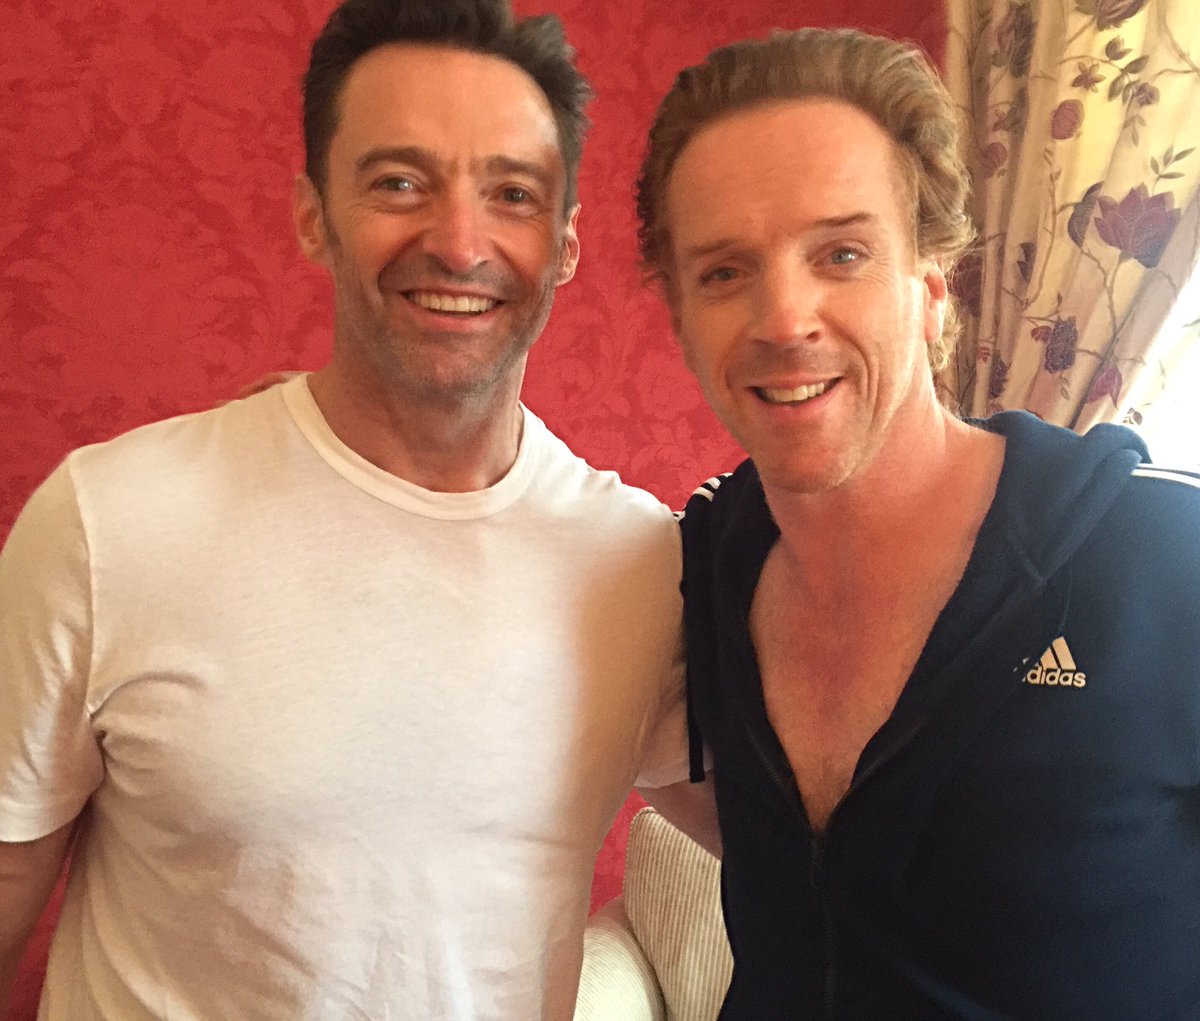 Don't miss The Goat!! Amazing play. Great actors and direction.
@lewis_damian https://t.co/q9gAgUJ4hJ